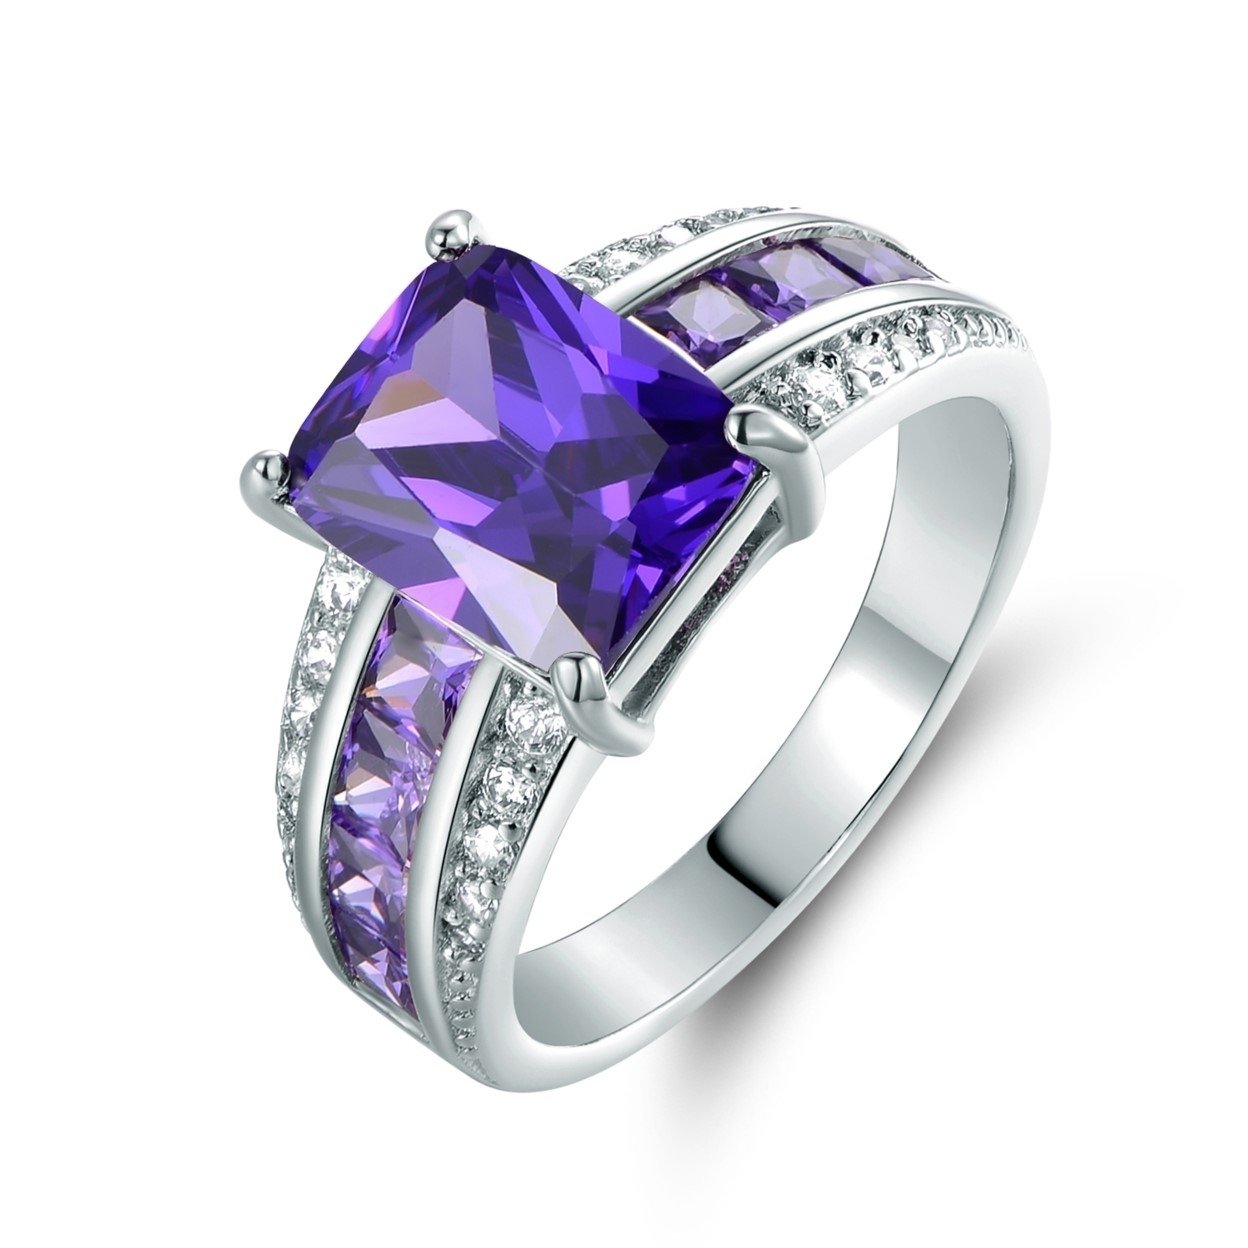 Princess Cut Amethyst Ring For Women – Refined 18K Gold-Plated Engagement Ring Adorned With Amethyst And Cubic Zirconia Stones - 6